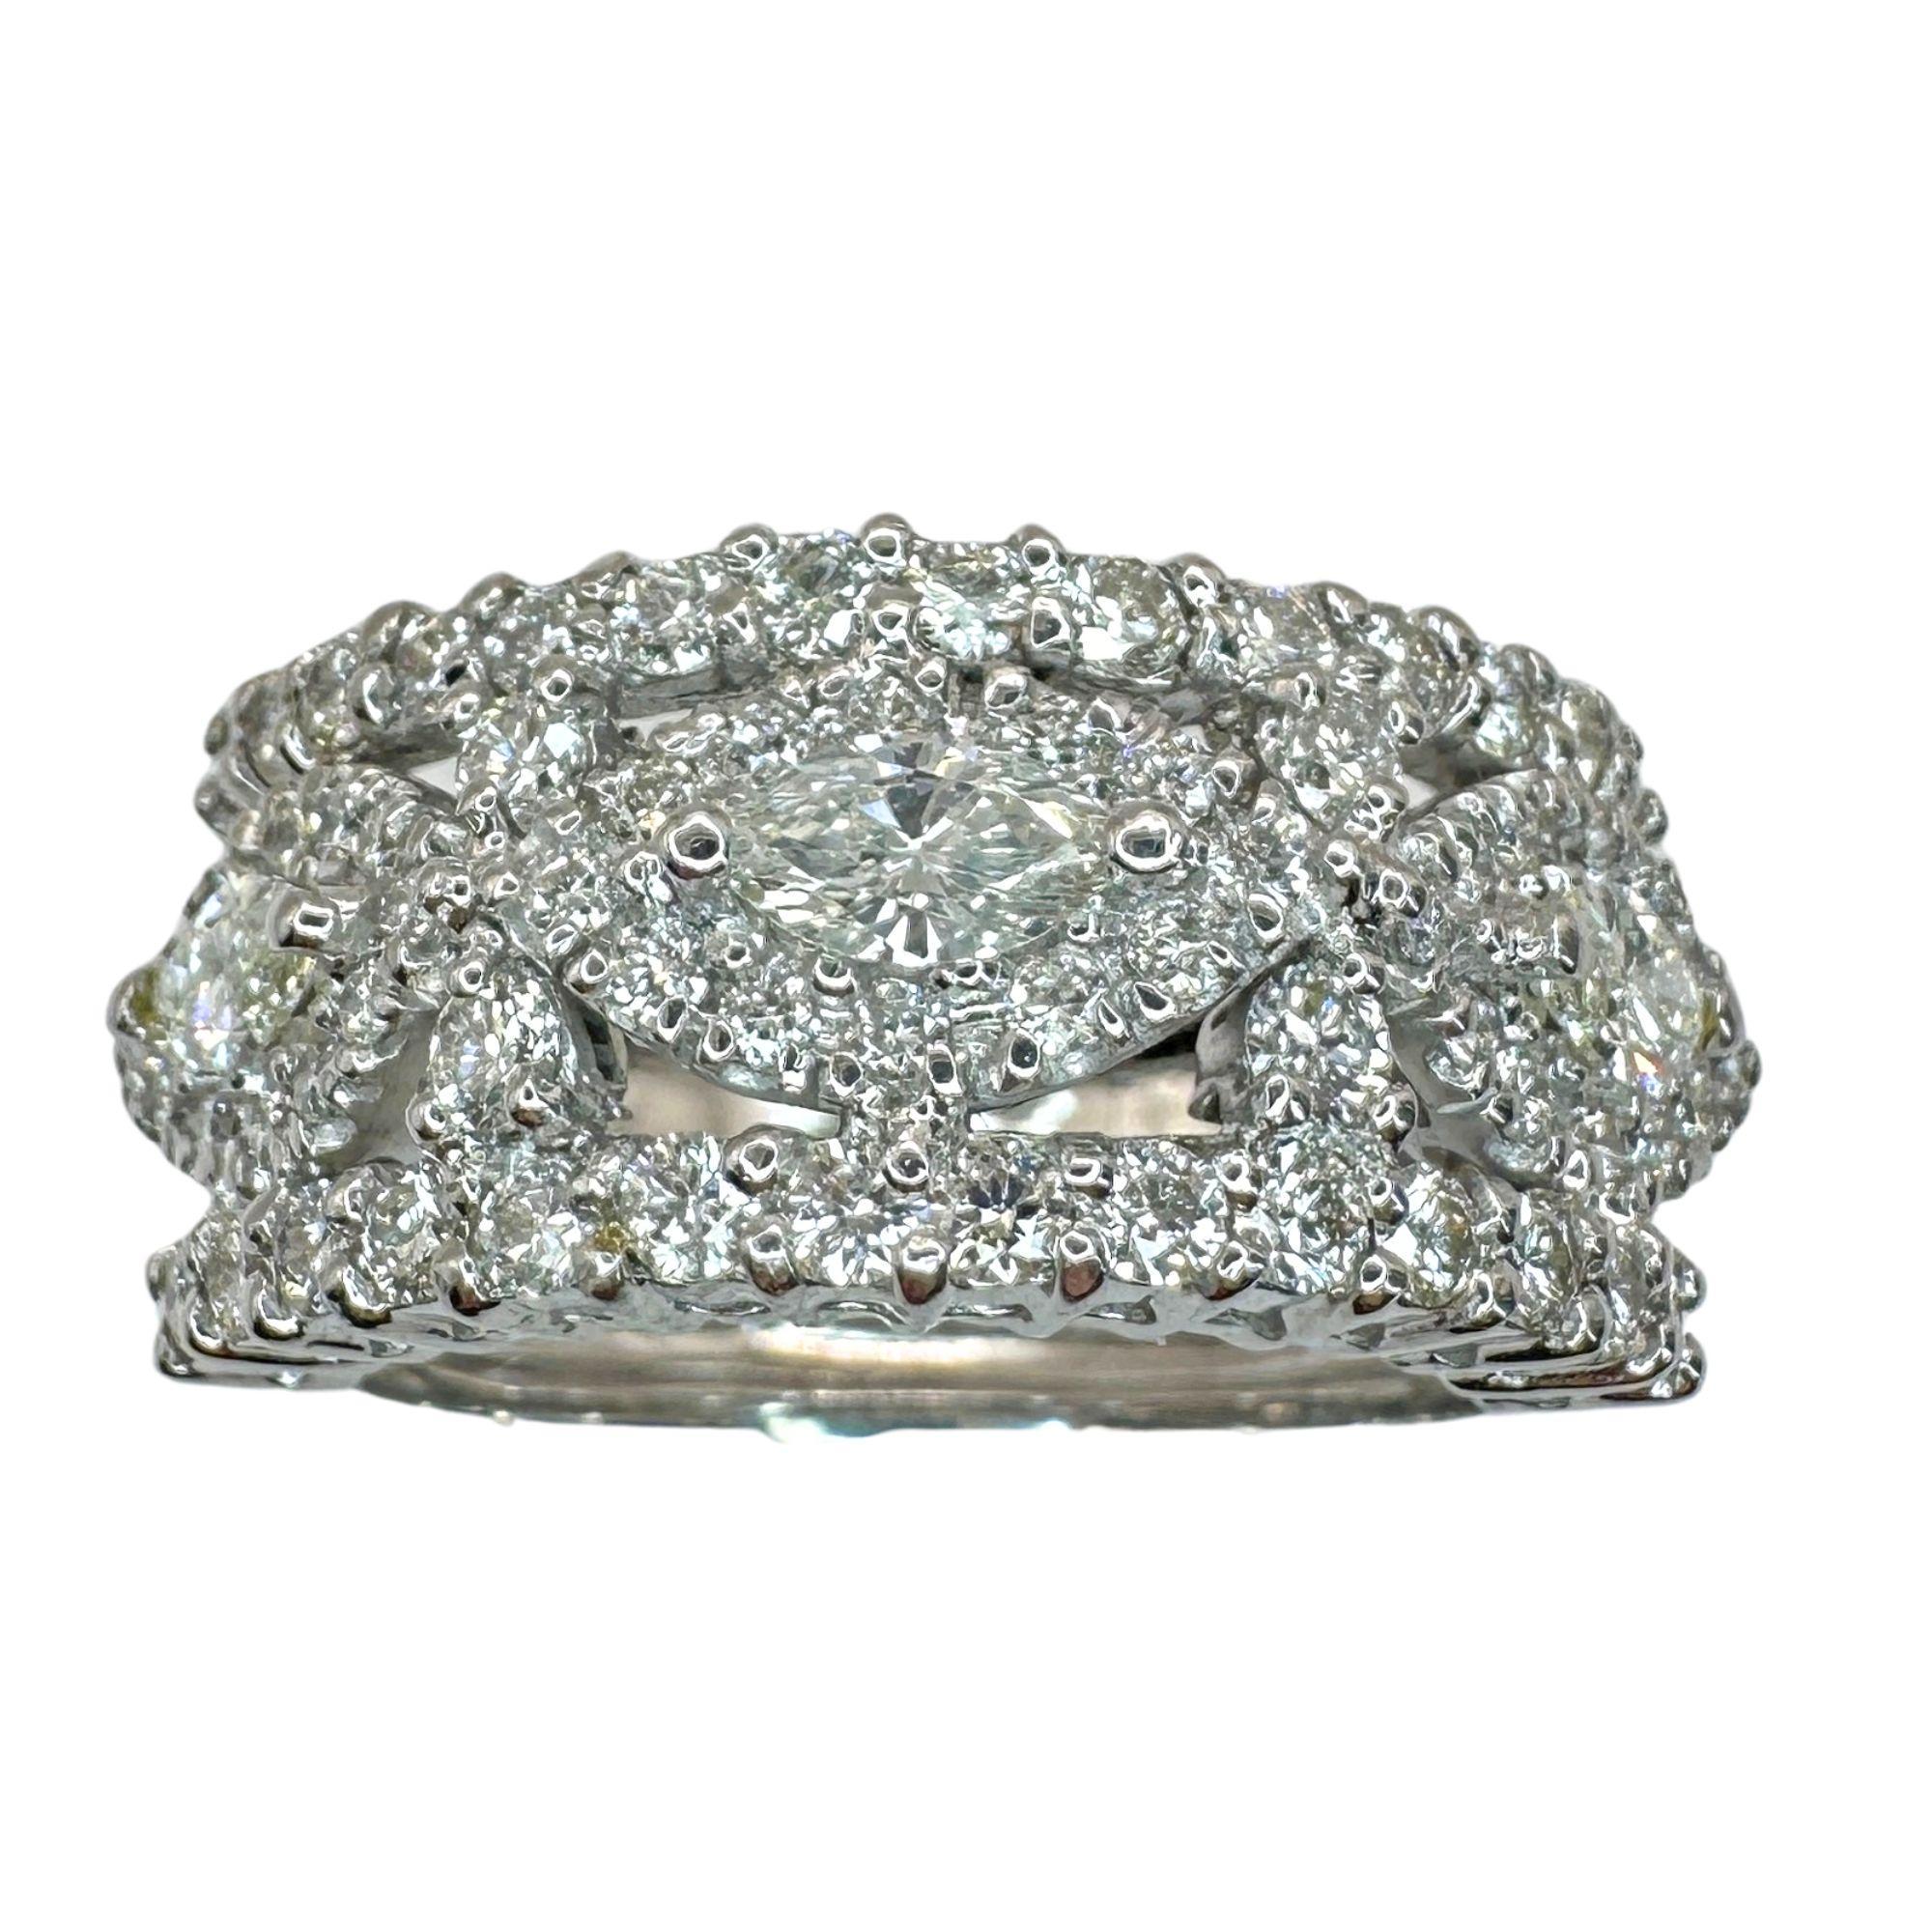 Indulge in ultimate luxury with our 18k Marquise Cut Wide Band Diamond Ring. Crafted from 18k white gold, this ring exudes elegance with a 1.68 carat marquise cut diamond and intricate markings. With a width of 11.01mm and weighing 9.3 grams, it's